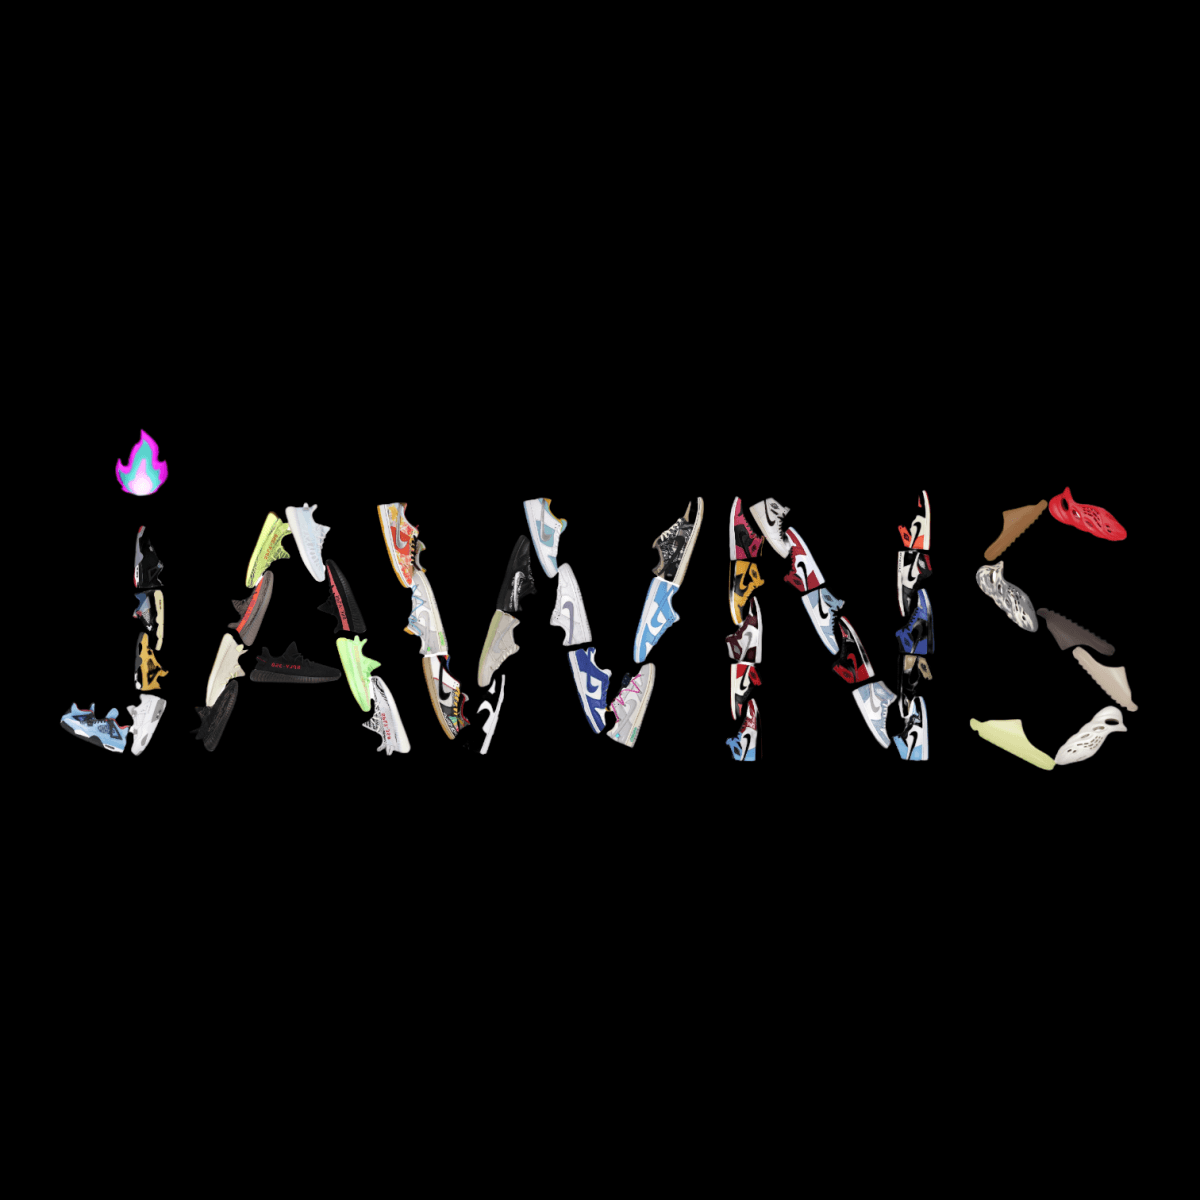 All Sneakers for Men, Women & Kids at Jawns on Fire Sneaker Boutique